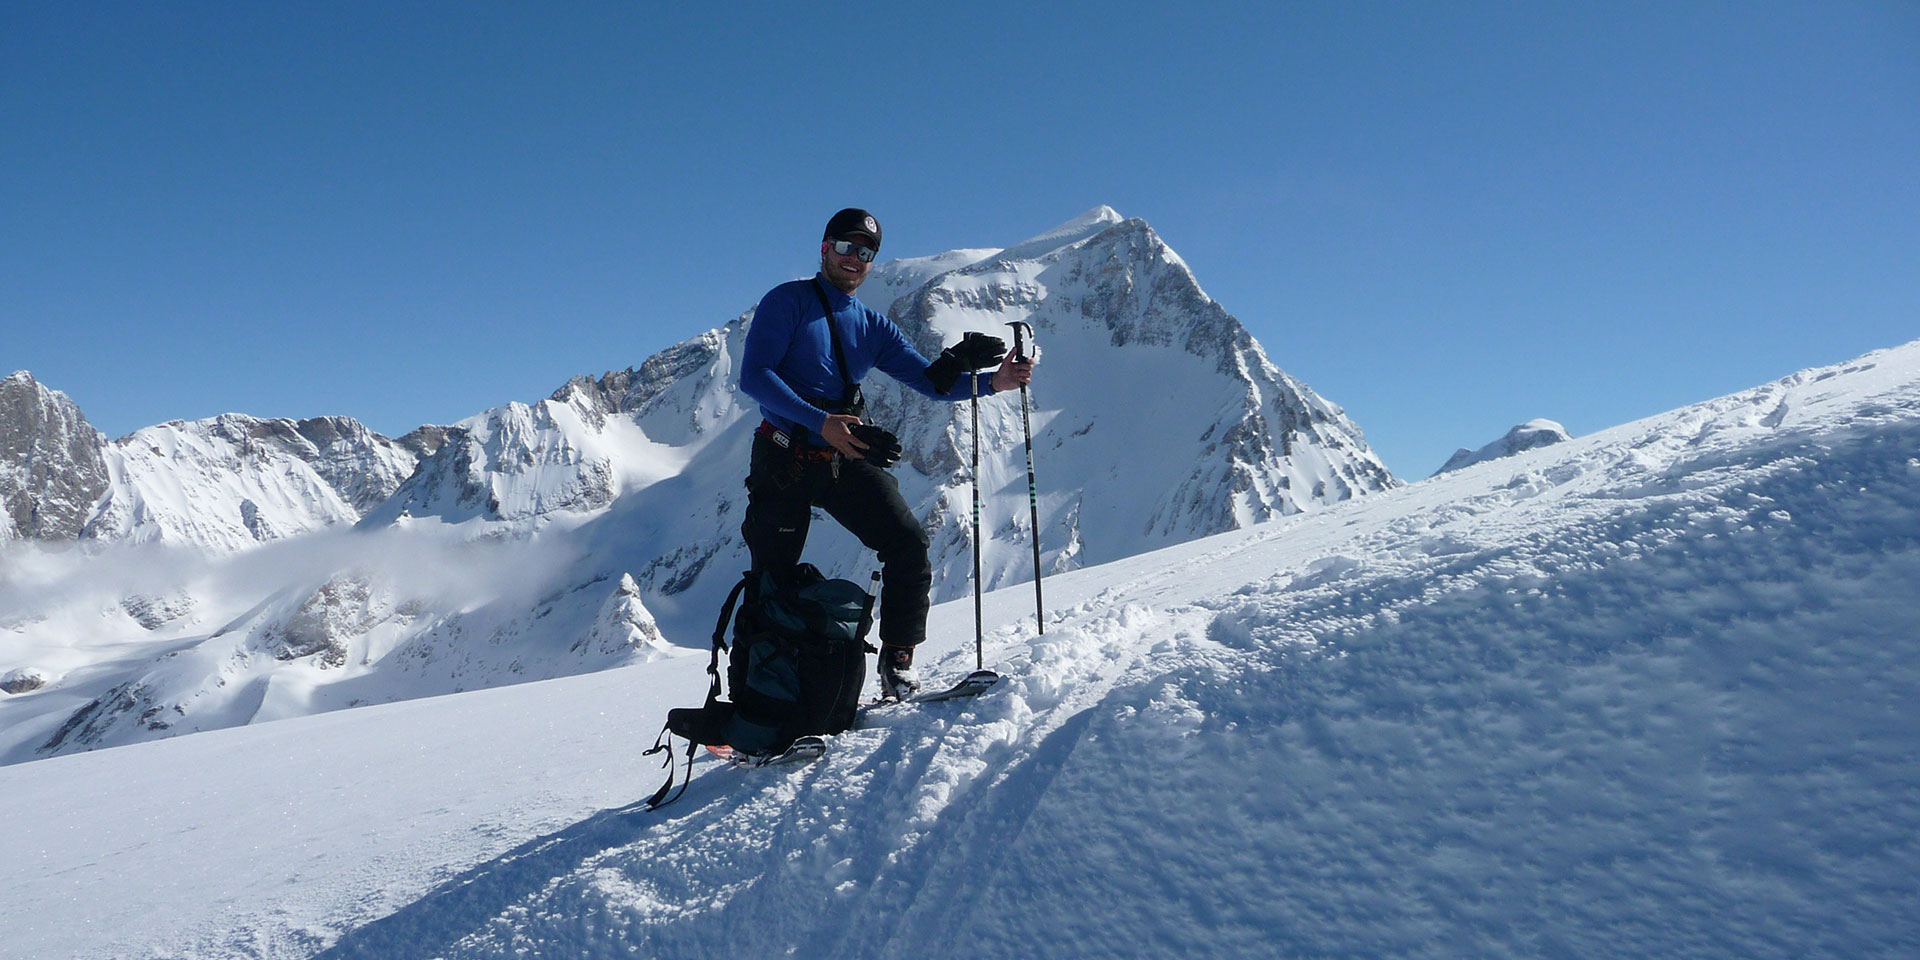 Skier resting during the ascent in skins at Pointe de la Réchasse.